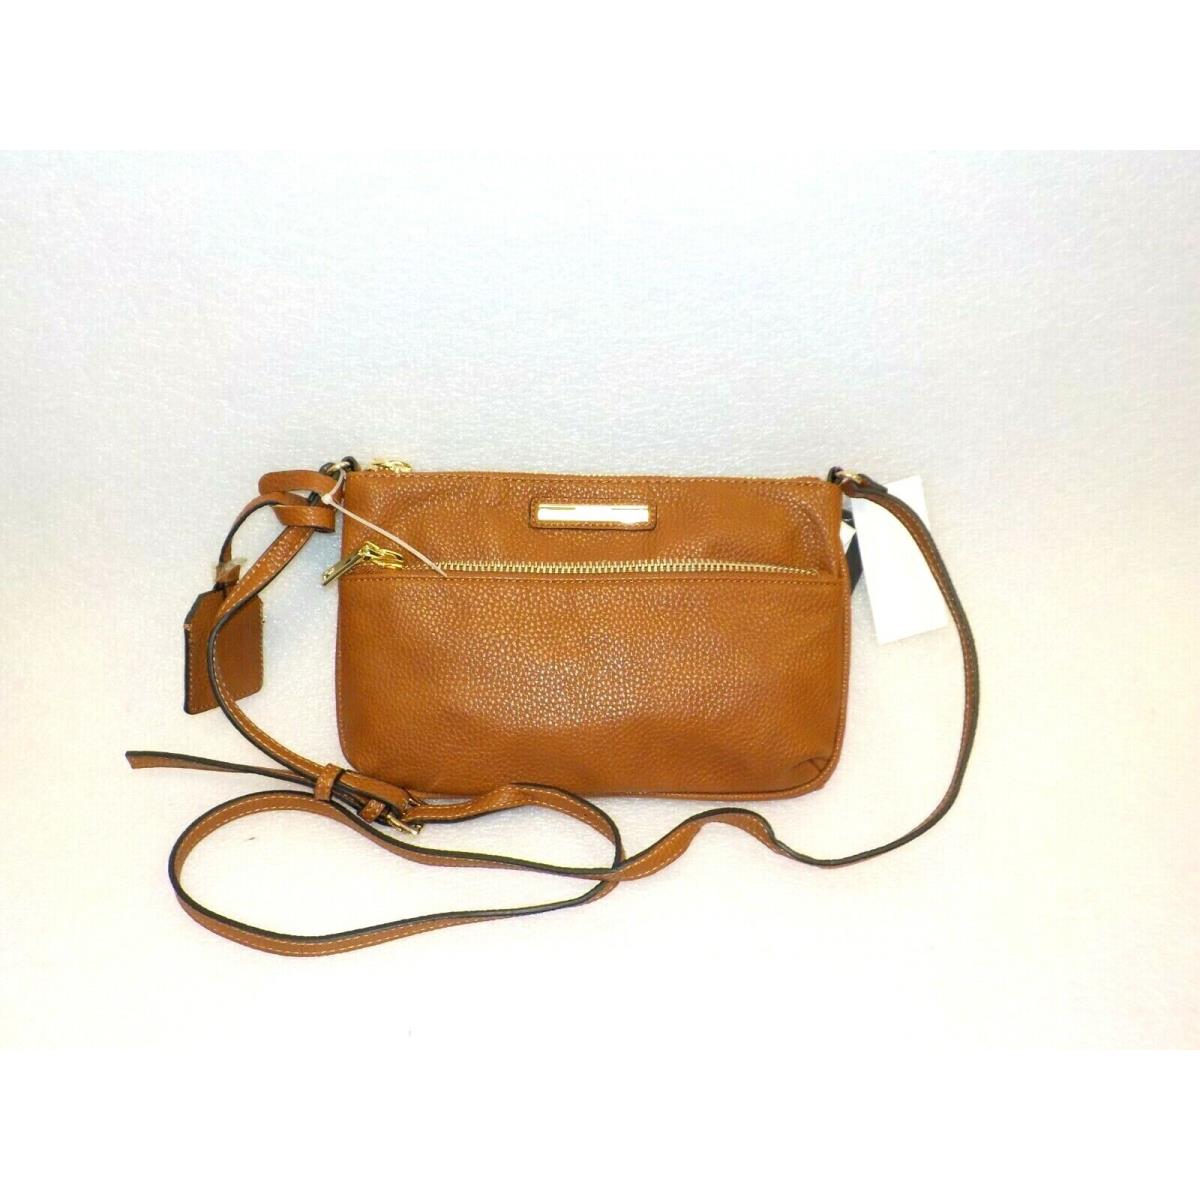 Steve Madden brown leather purse | Brown leather purses, Leather purses,  Purses